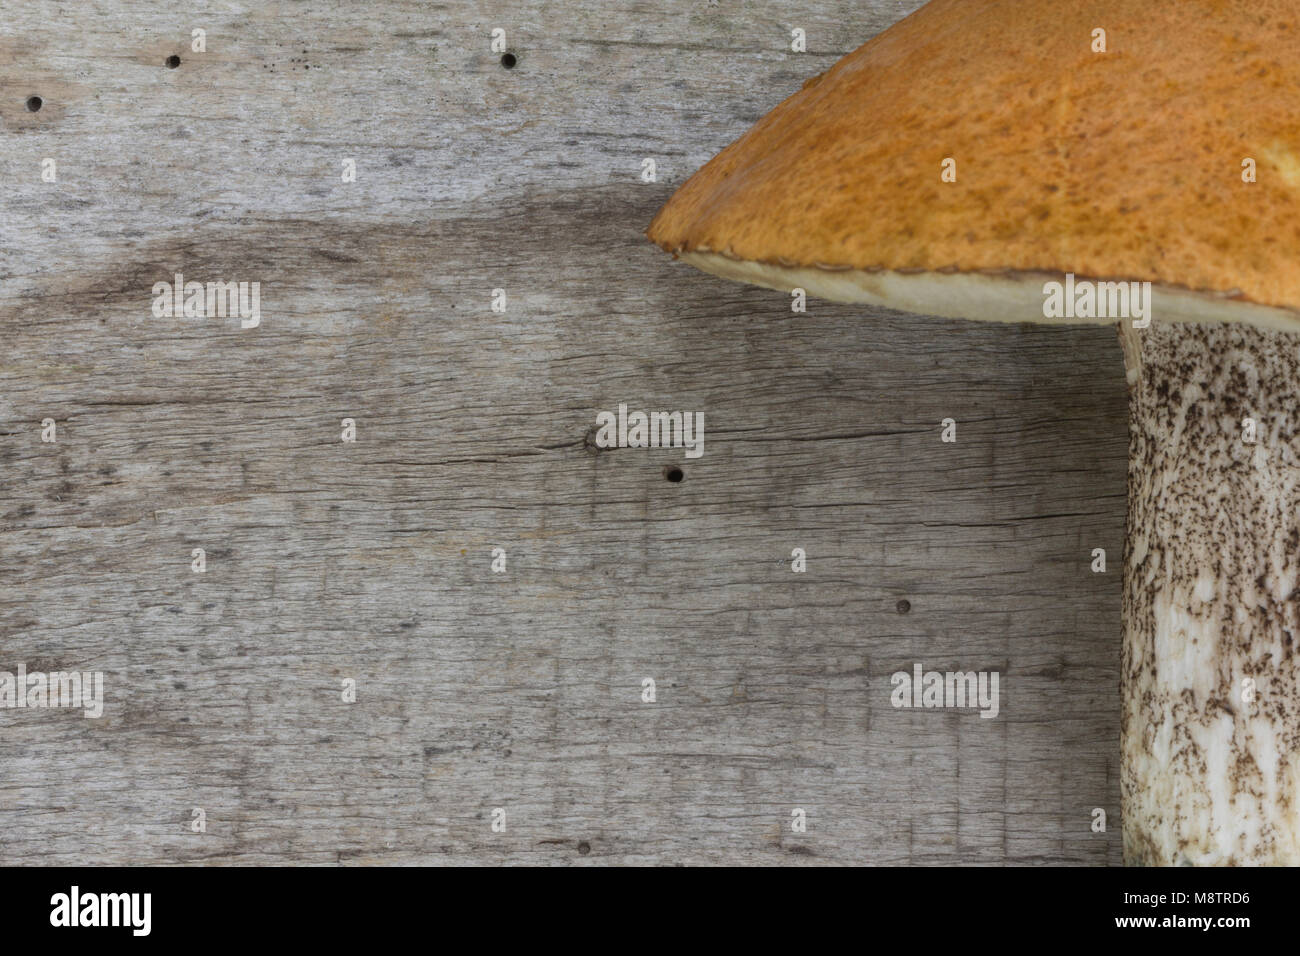 Mushrooms Brown Birch Bolete (Leccinum scabrum; Boletus scaber) on the old wooden board. Brown boletus. Background. Top view. Stock Photo